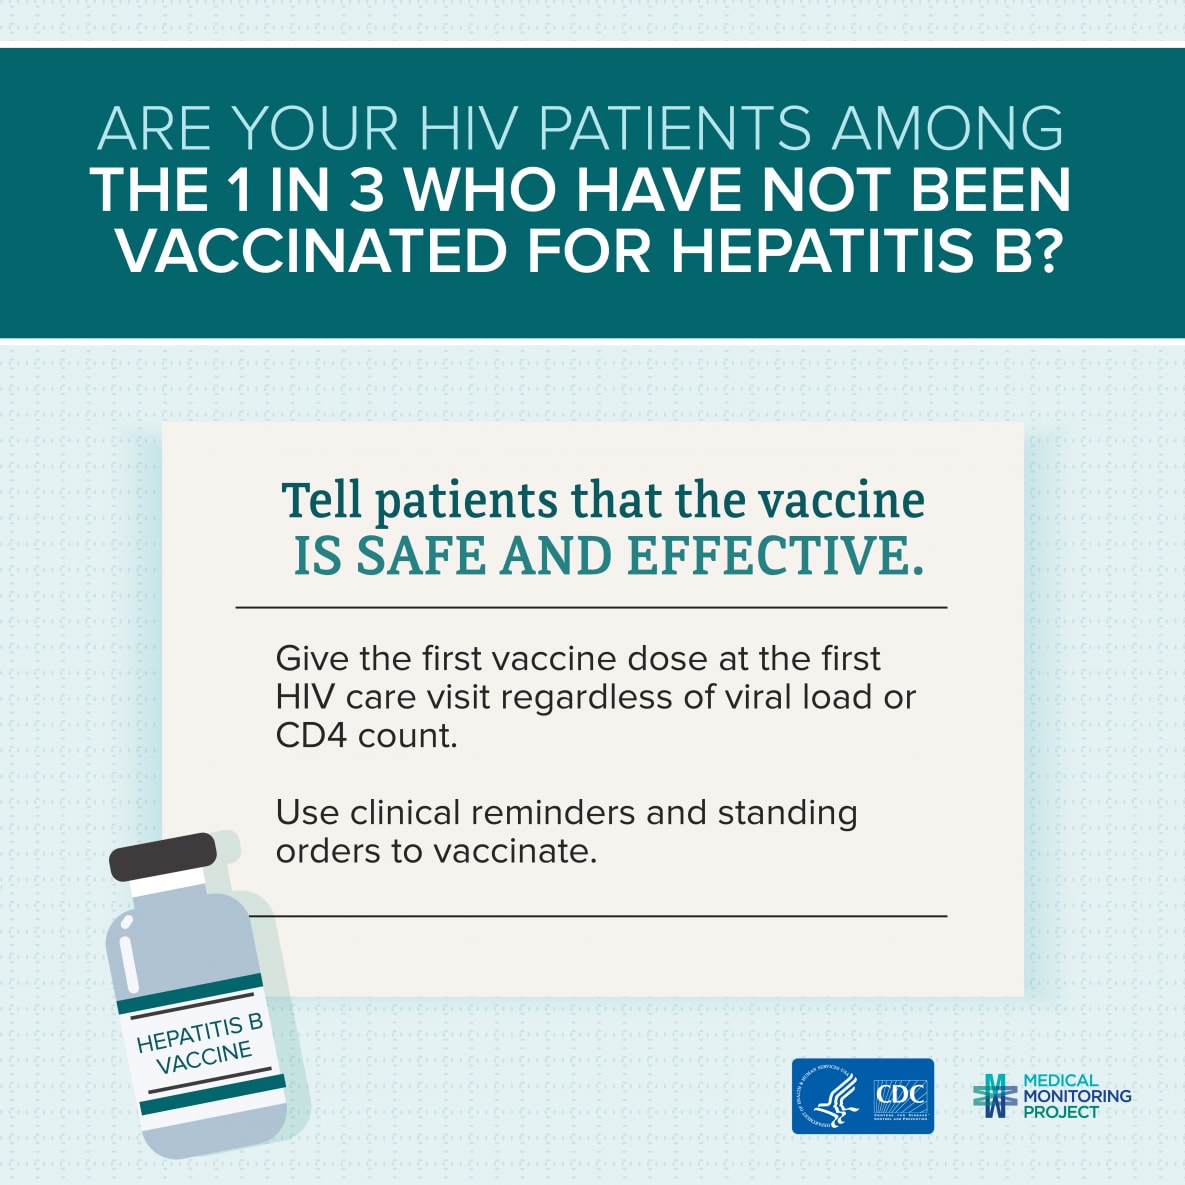 Are your patients among the 1 in 3 who have not been vaccinated for Hepatitis B? 1 in 3 people living with HIV have not been vaccinated for Hepatitis B? Tell patients that the vaccine is safe and effective. Give the first vaccine dose at the first HIV care visit regardless of viral load or CD4 count. Use clinical reminders and standing orders to vaccinate.